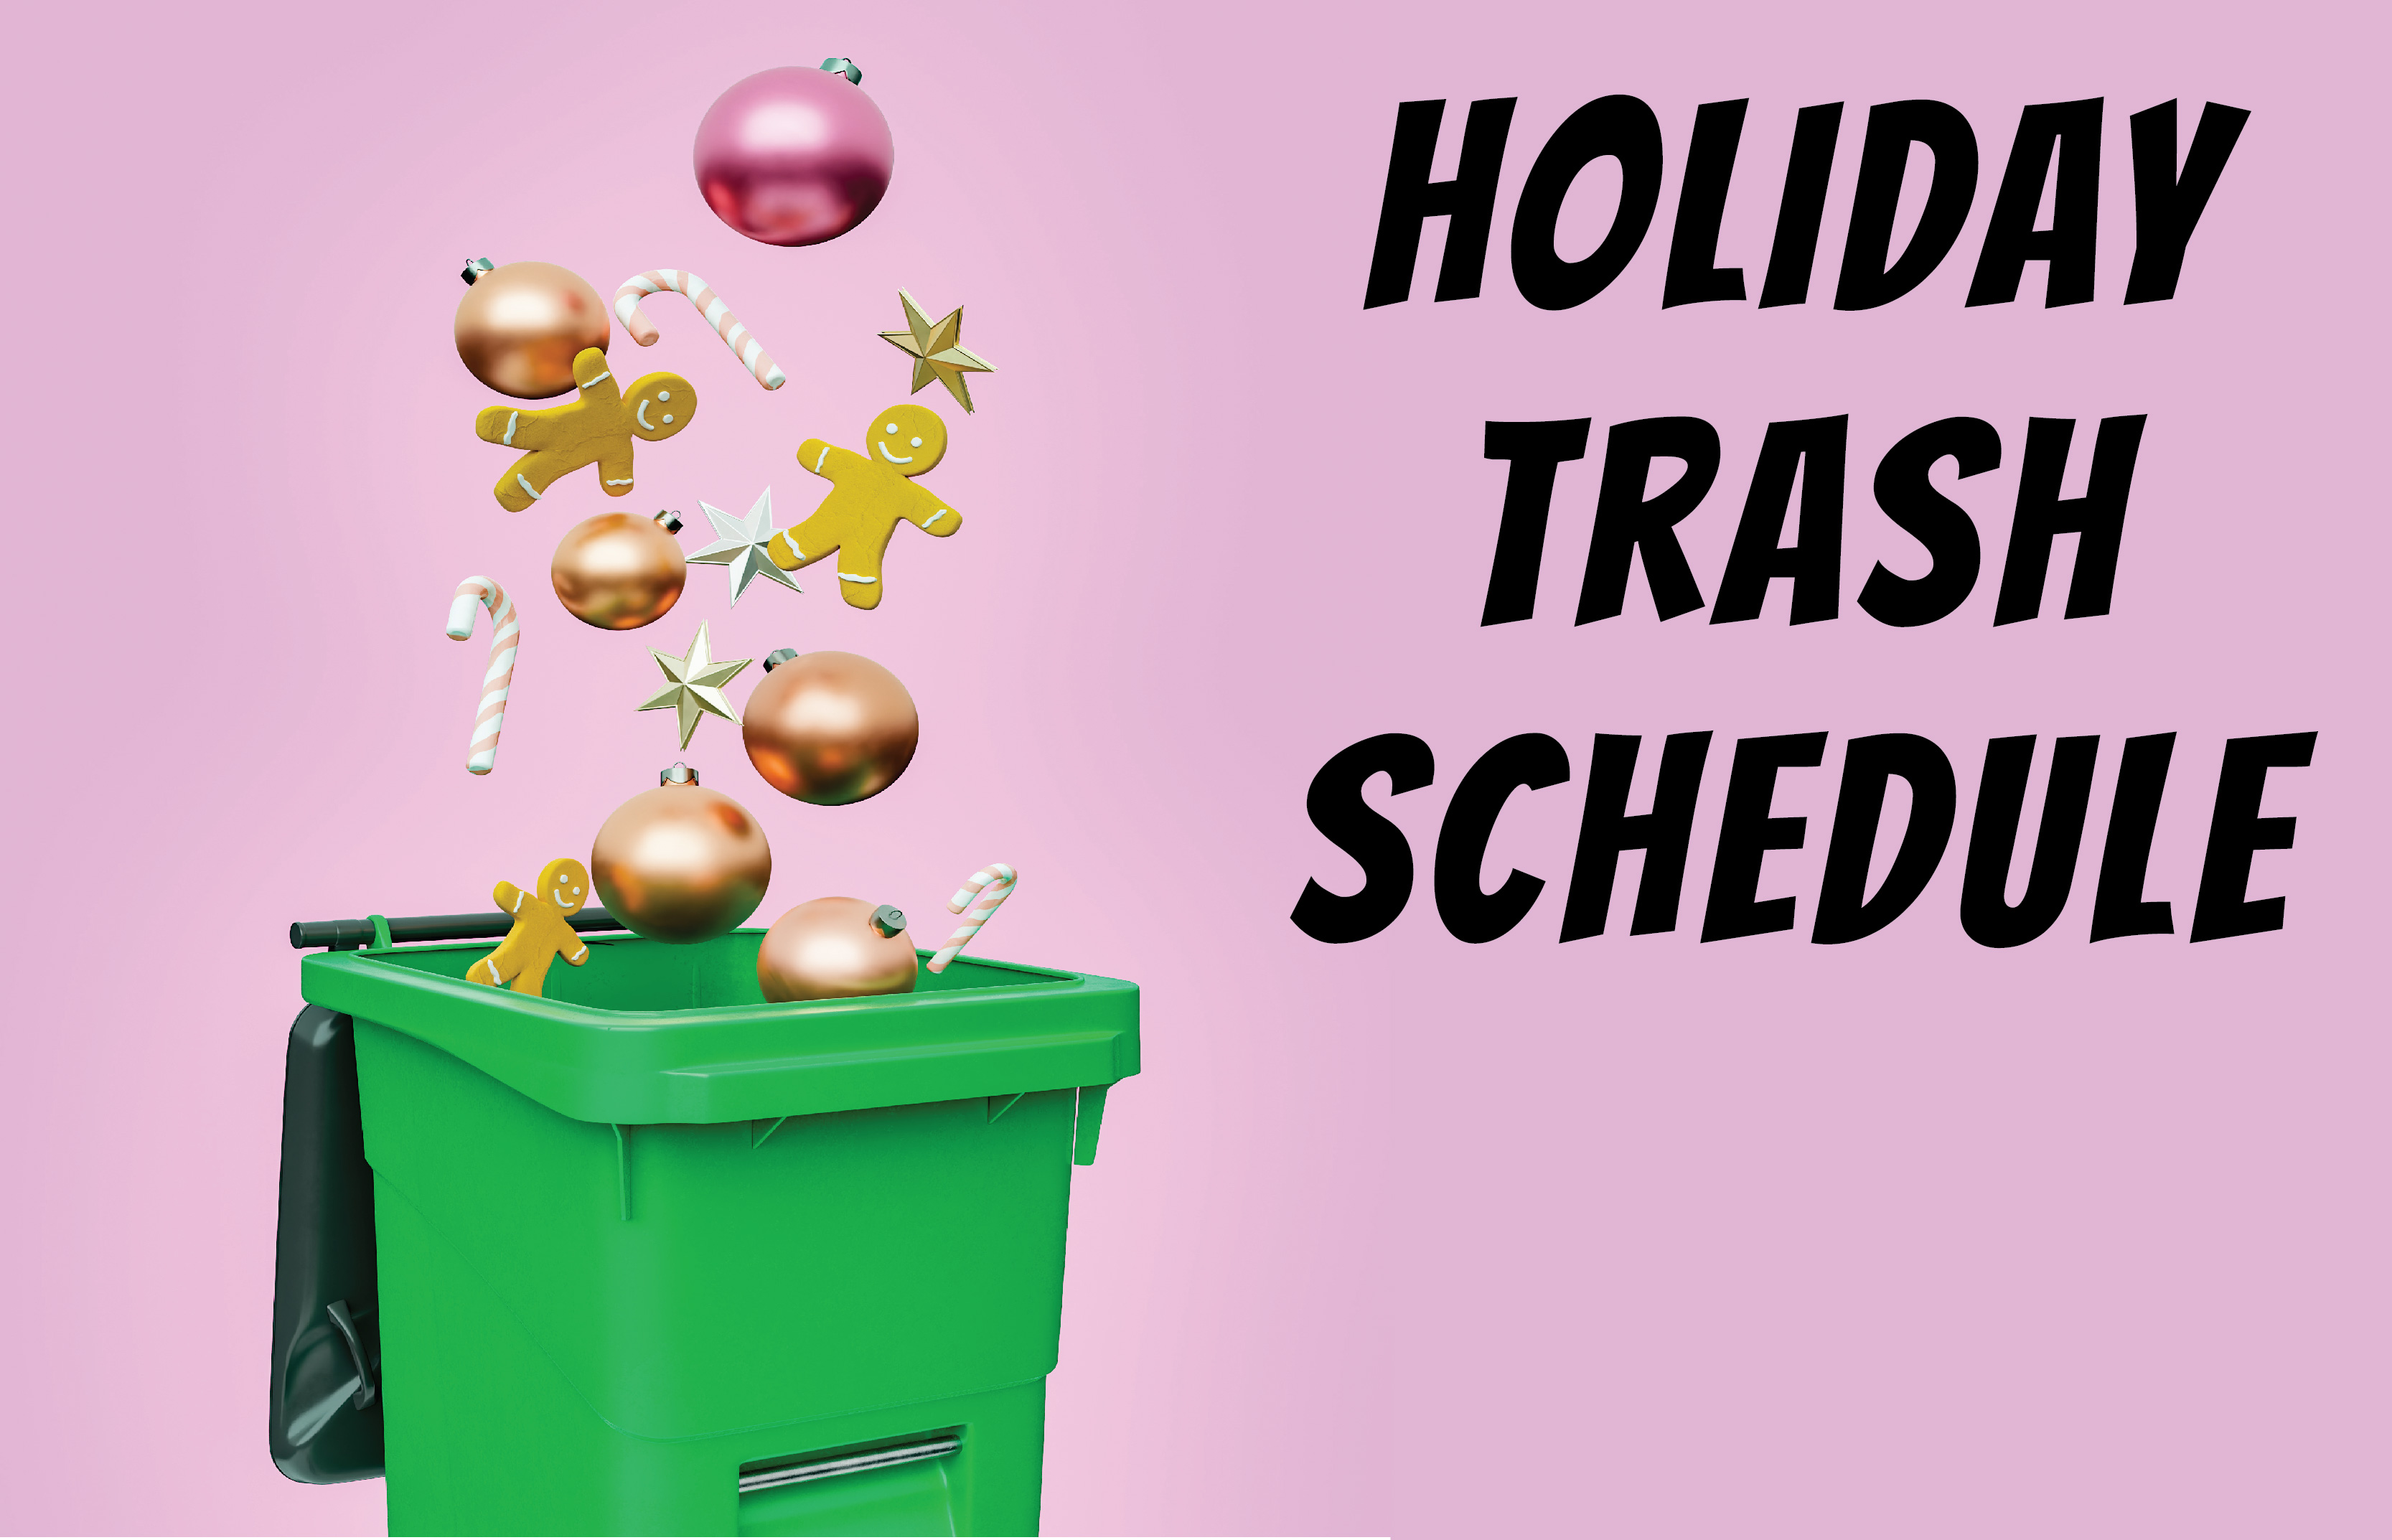 Trash Service Over the Holidays in Sheffield